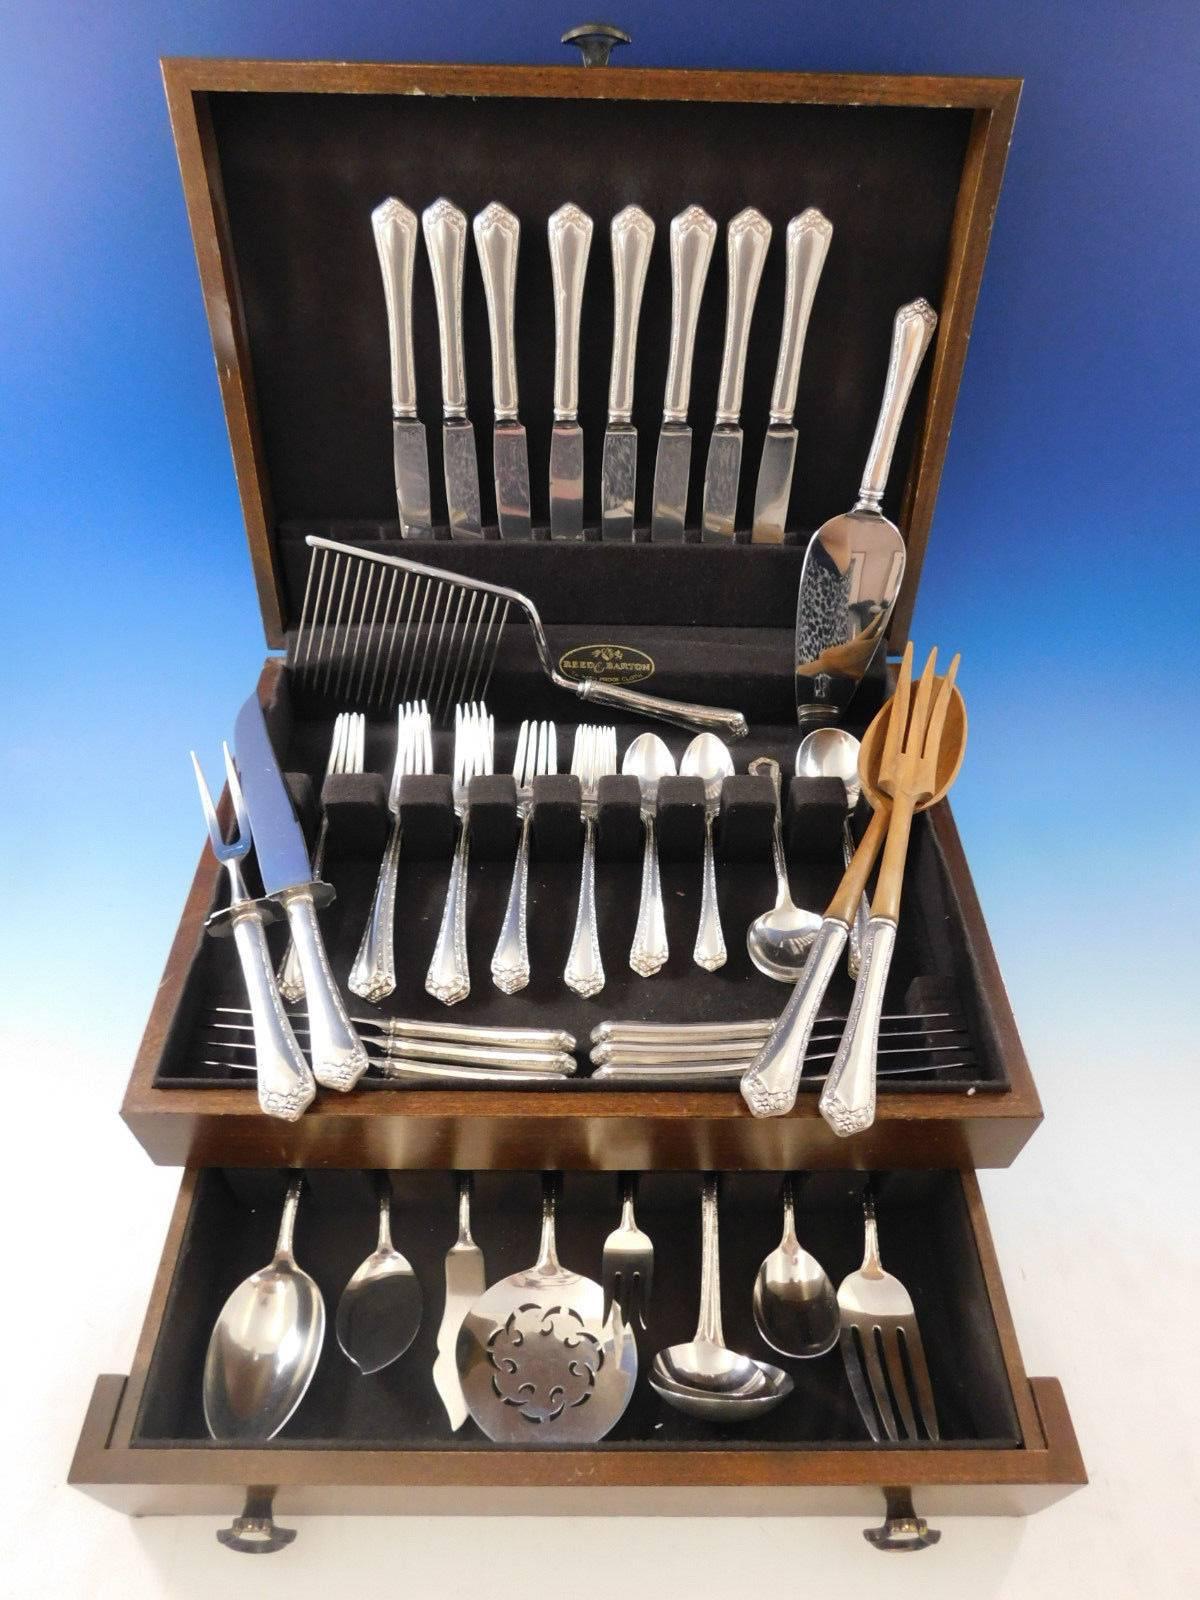 Lovely Rosemary by Easterling sterling silver flatware set with many servers, 63 pieces. This set includes:

Eight knives, 8 7/8